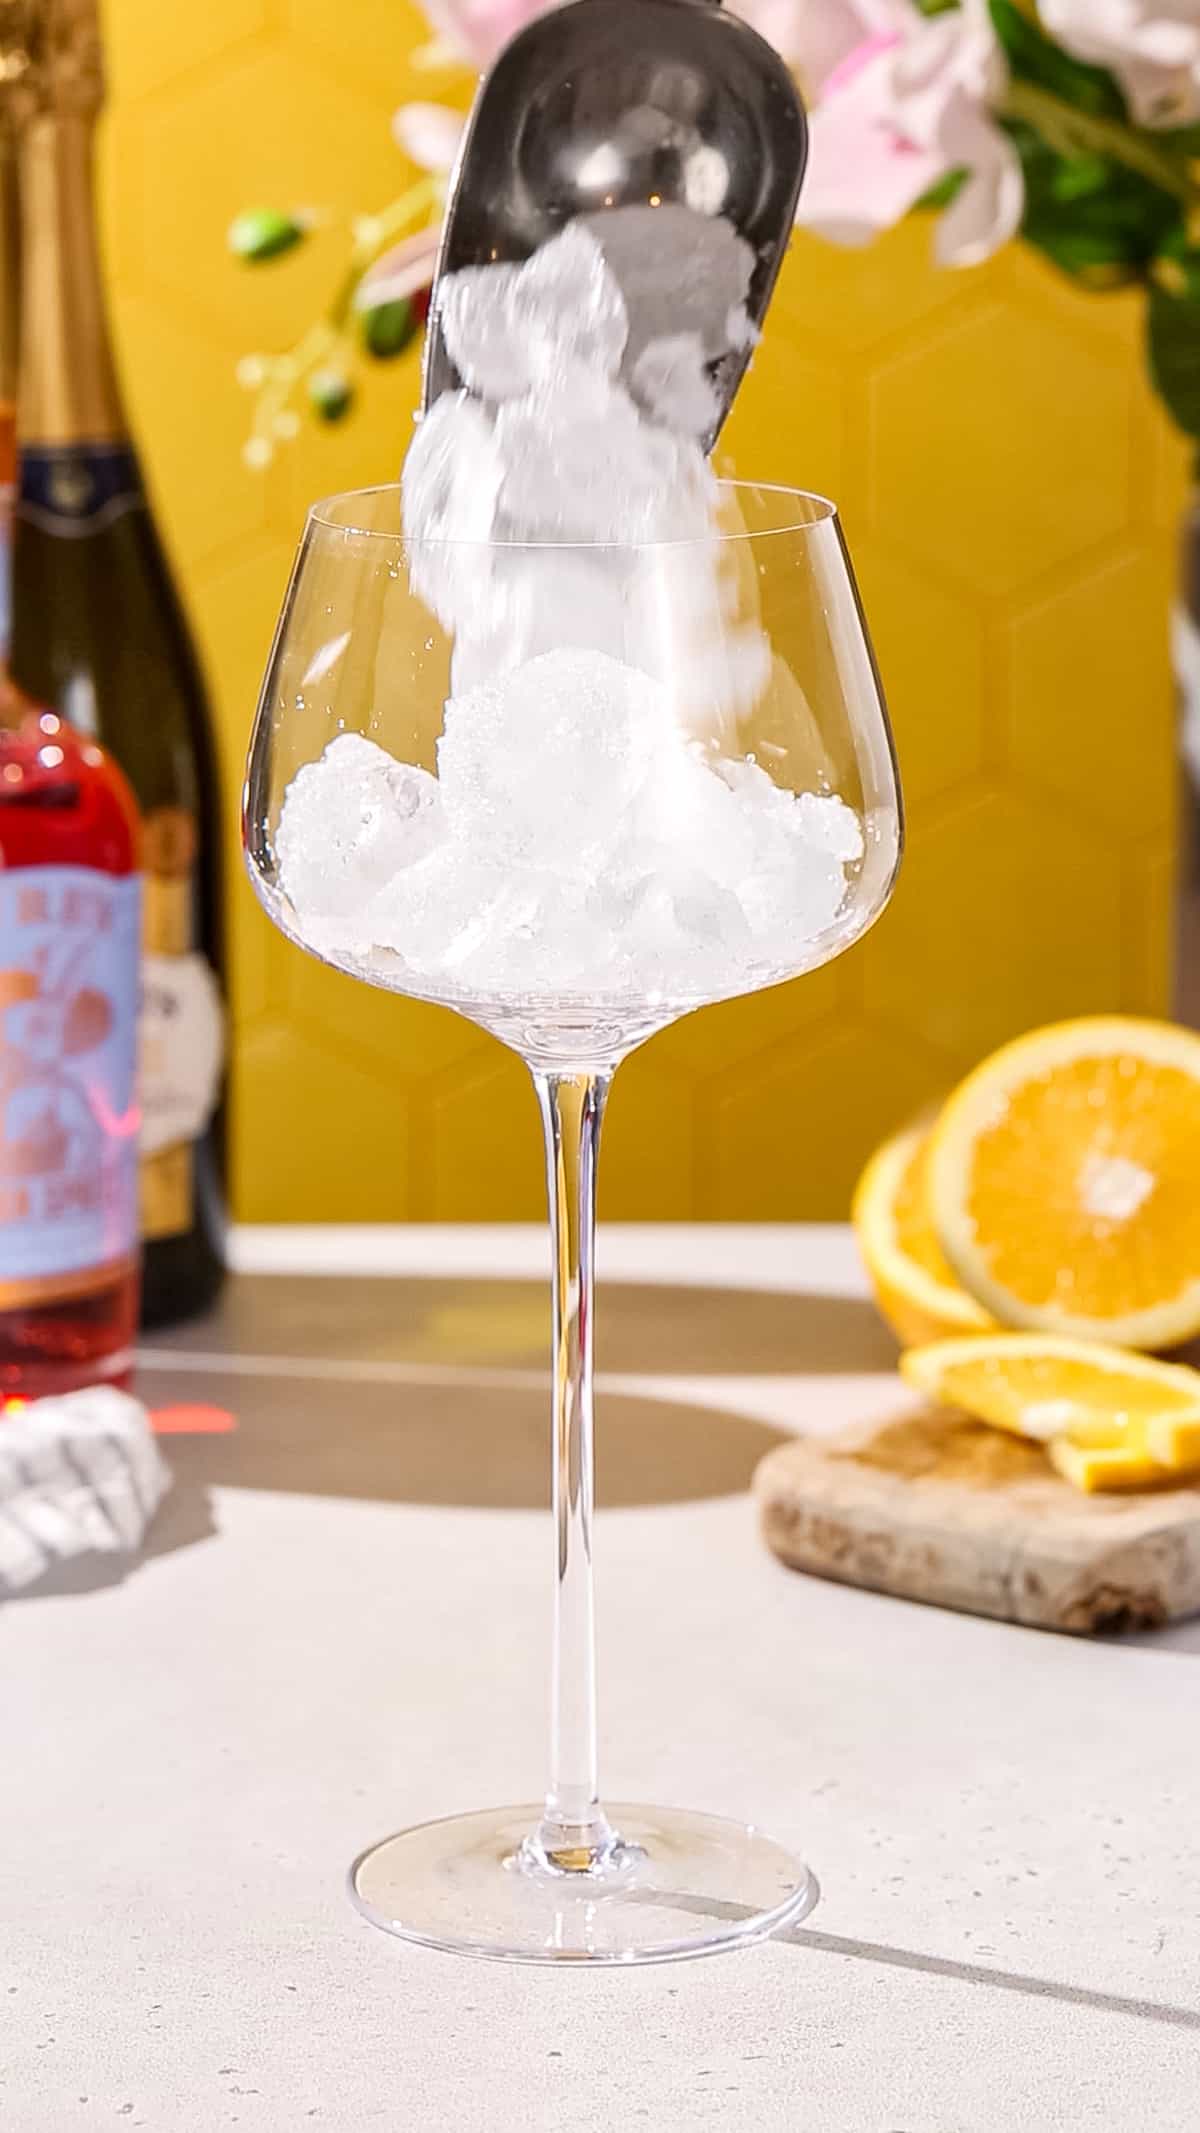 Hand using an ice scoop to add ice to a large spritz glass.